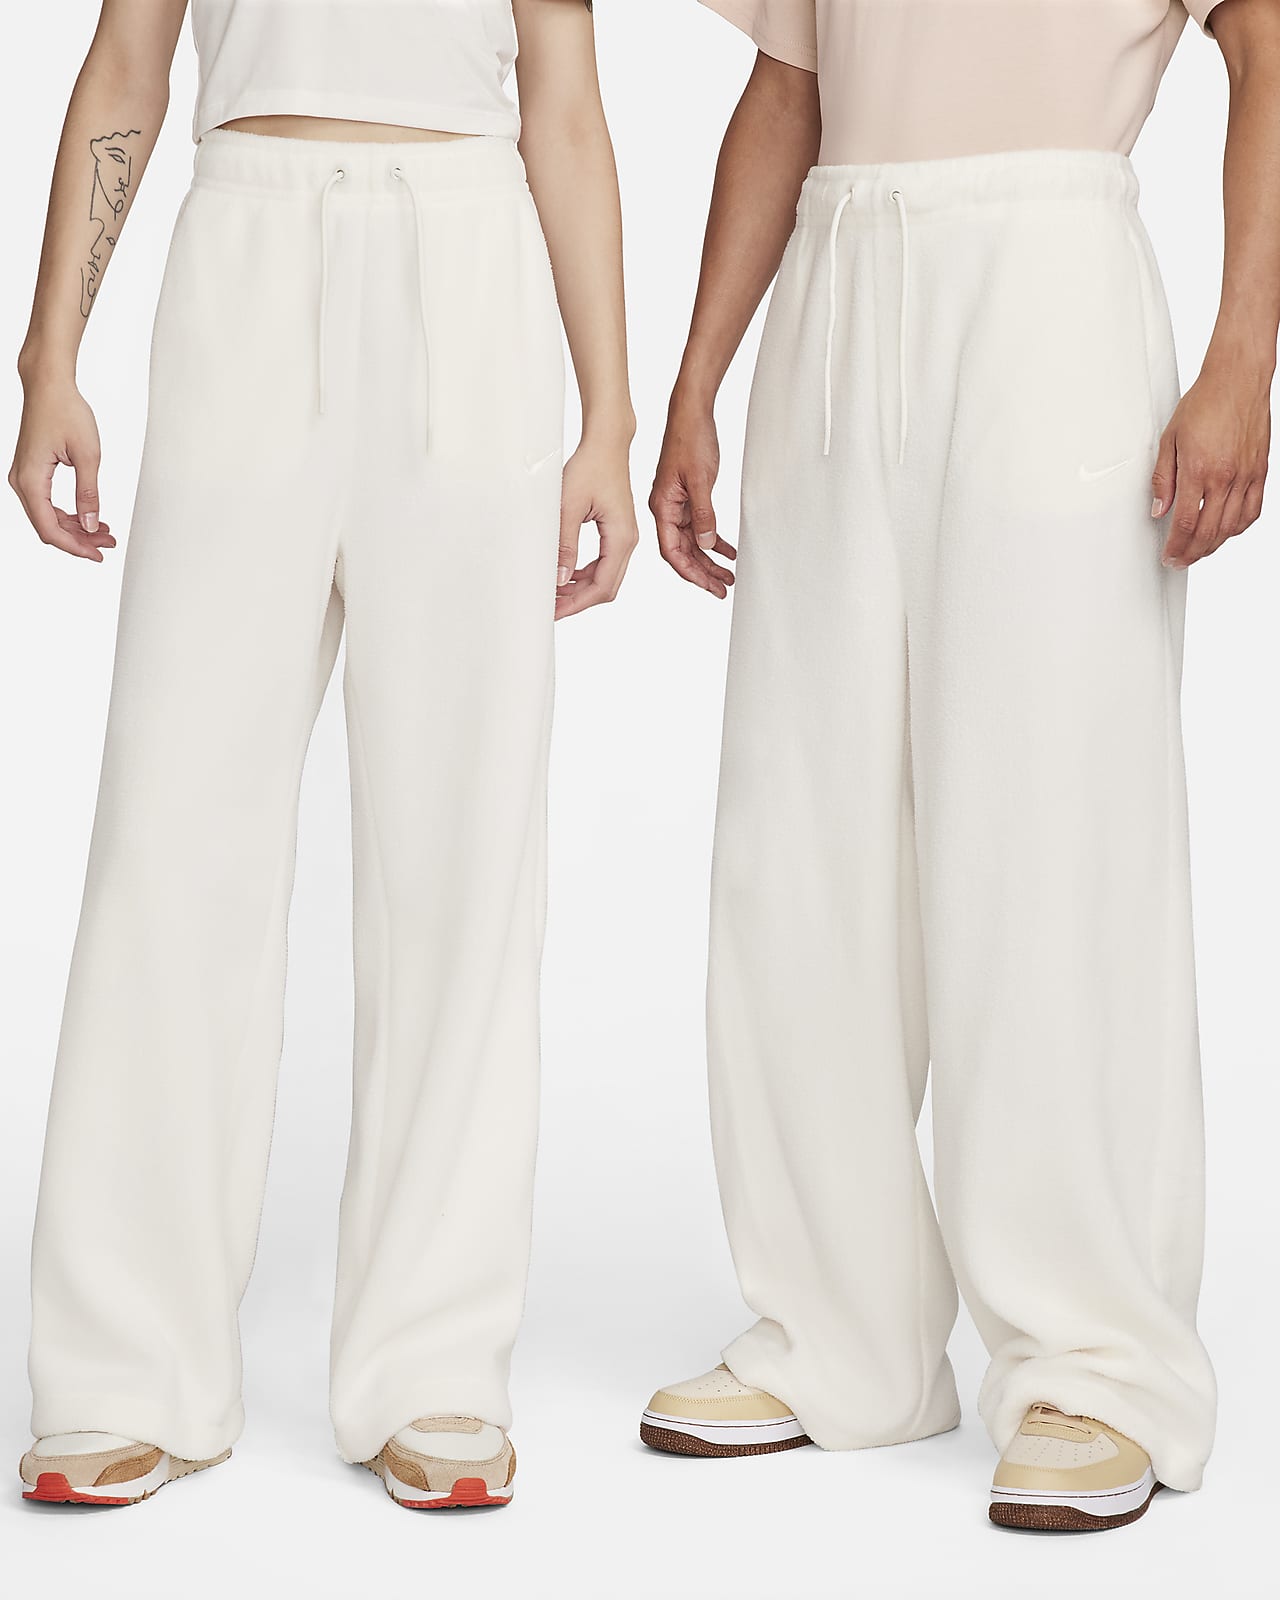 Trousers India | Buy Trousers for Men, Women Online in India